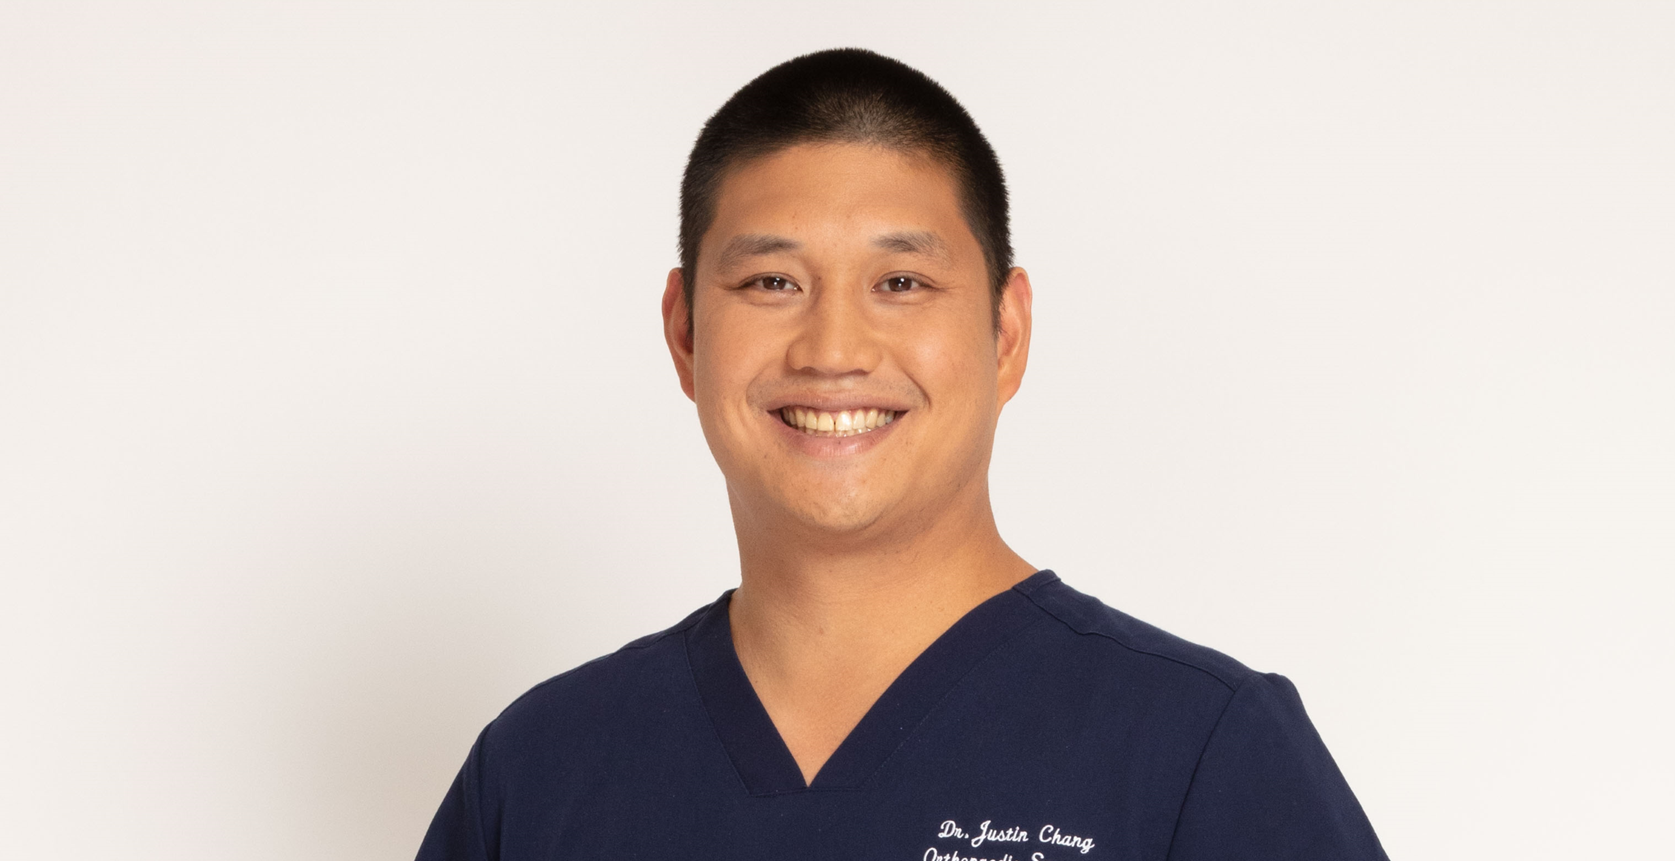 Revision Total Hip and Knee Replacement – Dr. Justin Chang